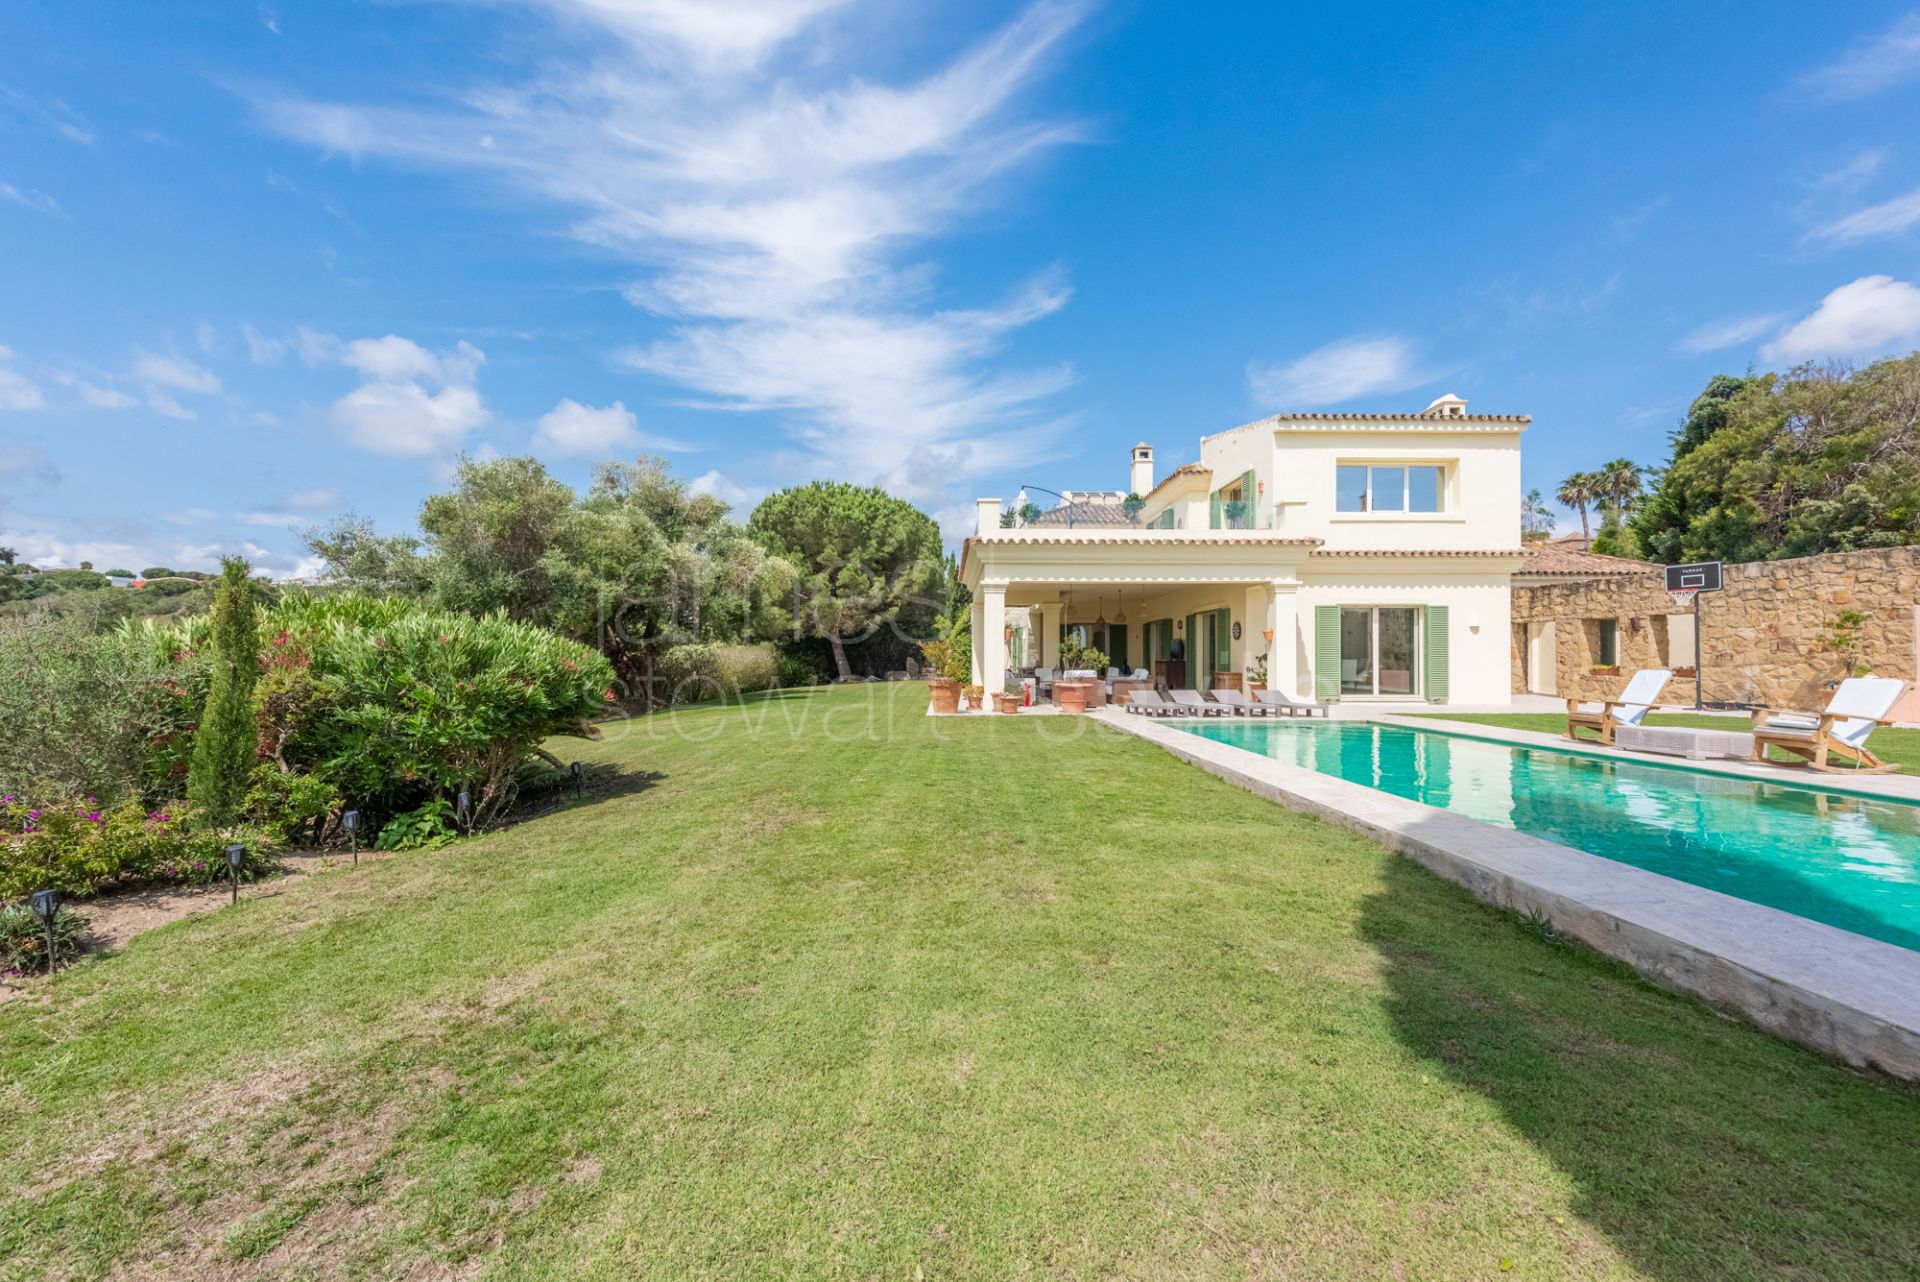 Excellent villa on 4400m2 of plot in the F zone - panoramic sea views and independent guest house